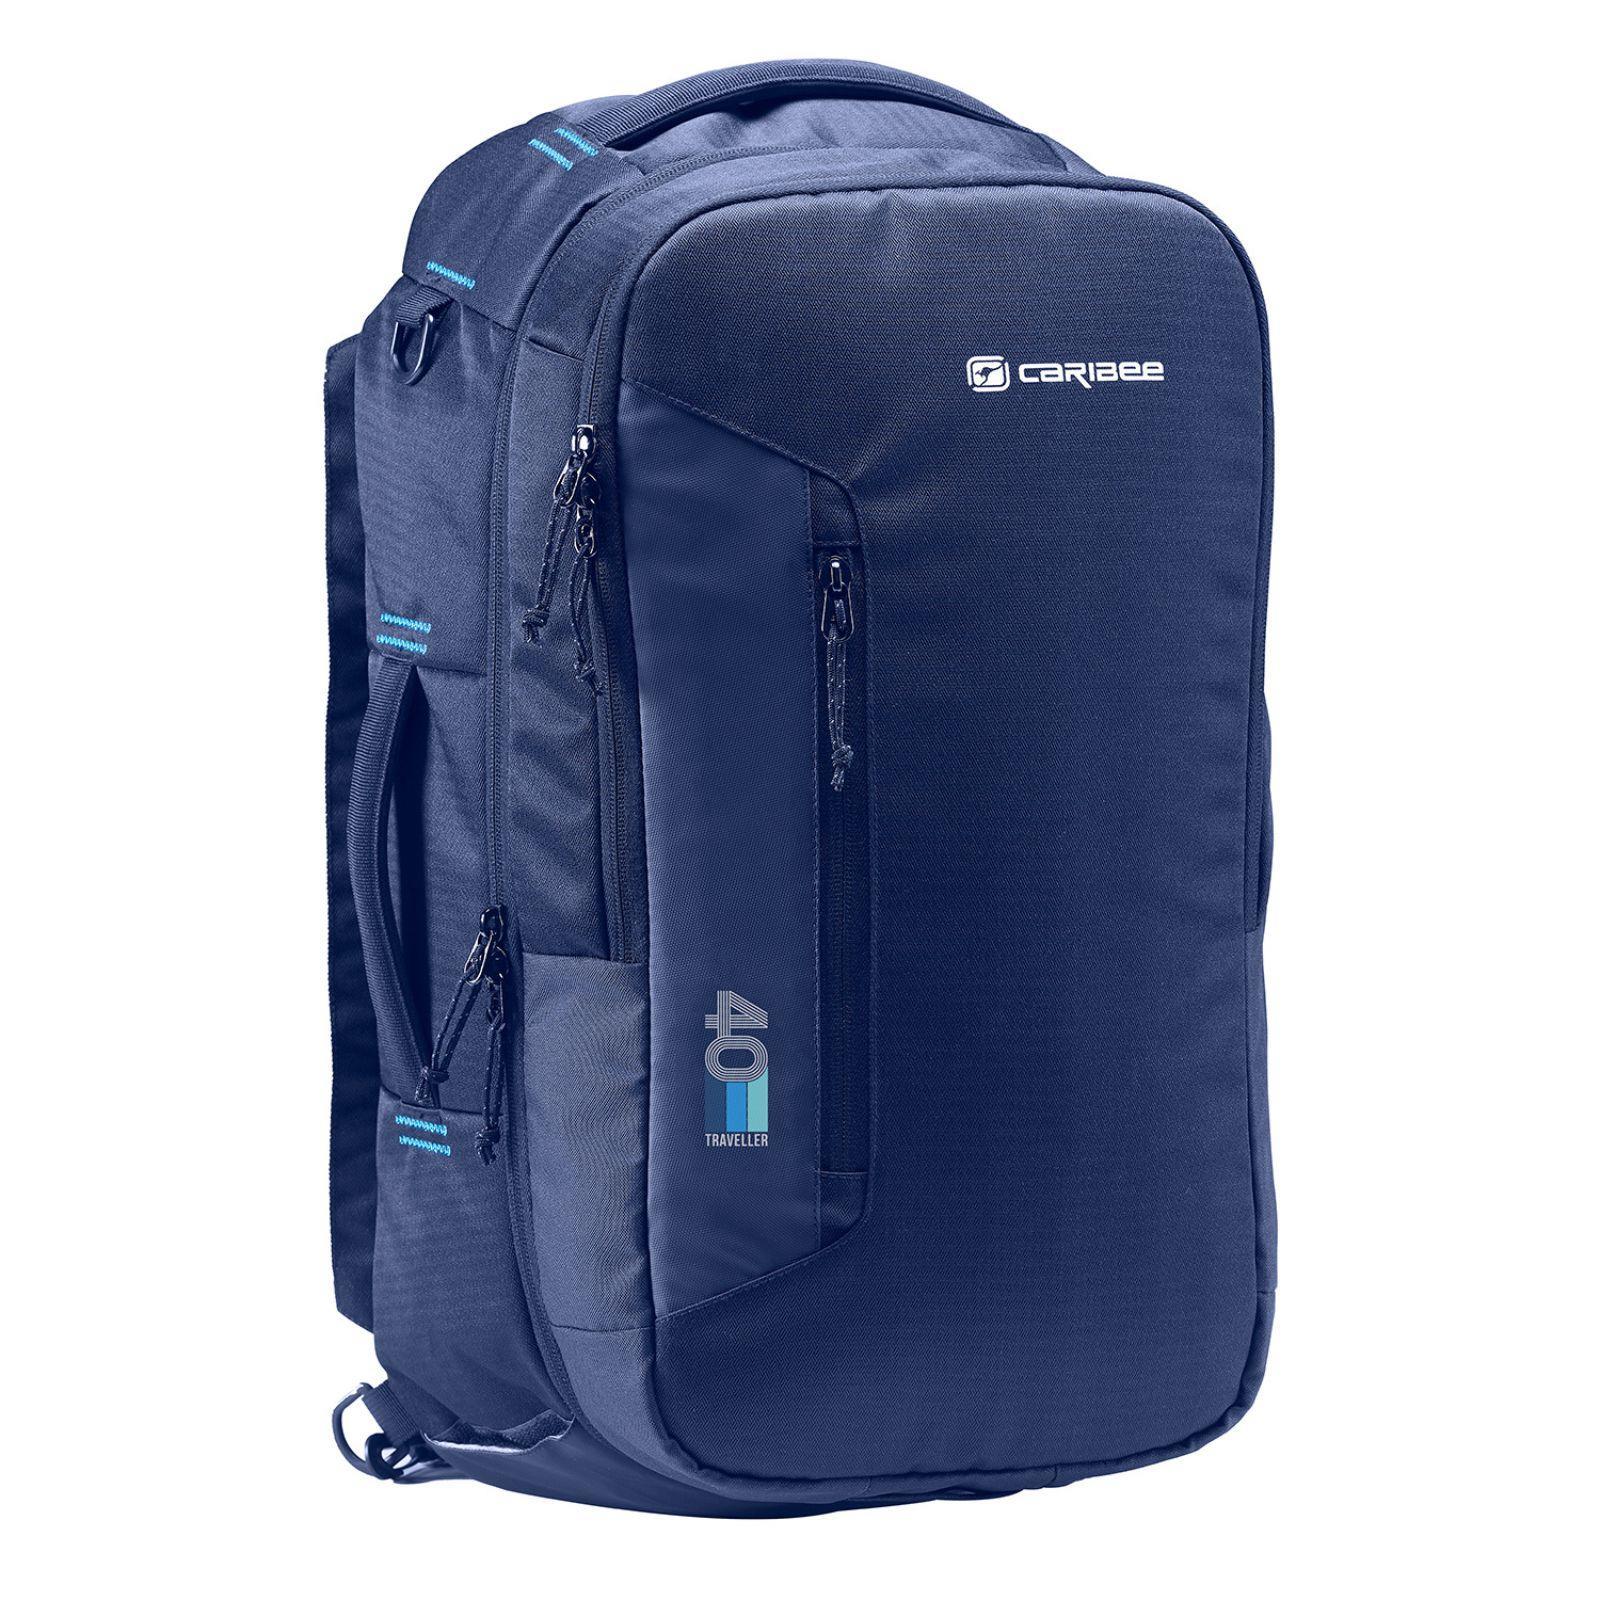 Caribee Traveller 40L Carry On Backpack Duffle Bag Navy 69061